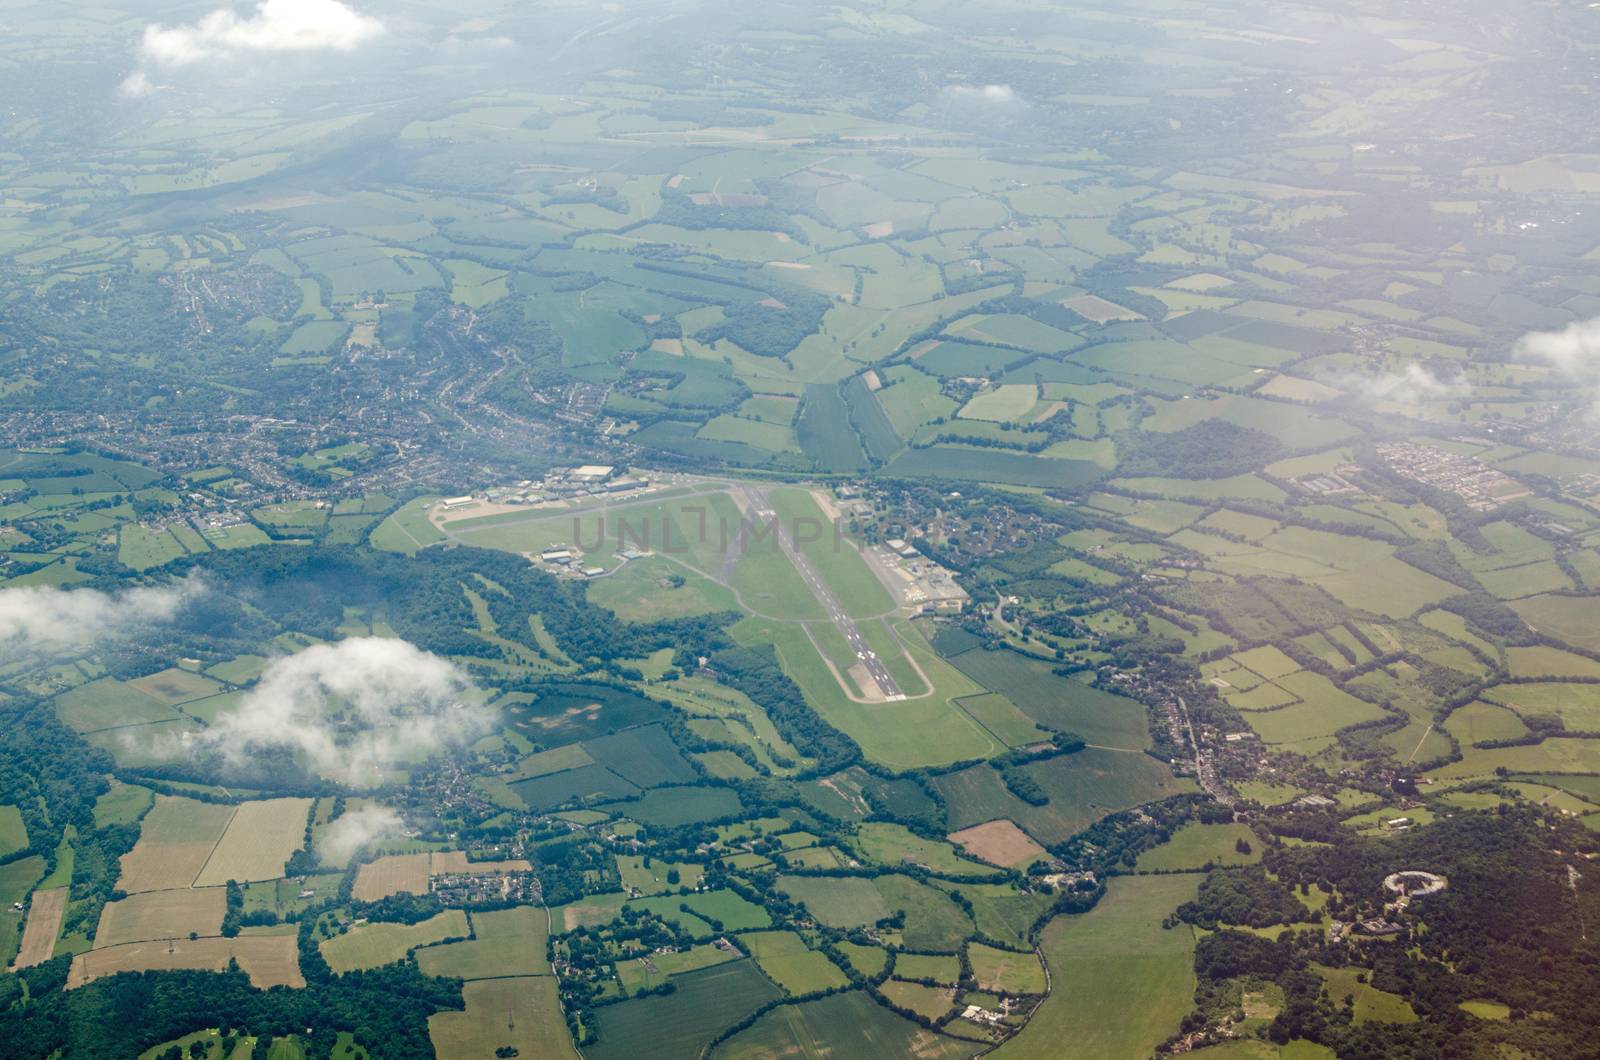 Aerial view of Biggin Hill Airport on the outskirts of the London Borough of Bromley.  During World War II, it was one of the Royal Air Force's main fighter stations and played an important role during the Battle of Britain.  